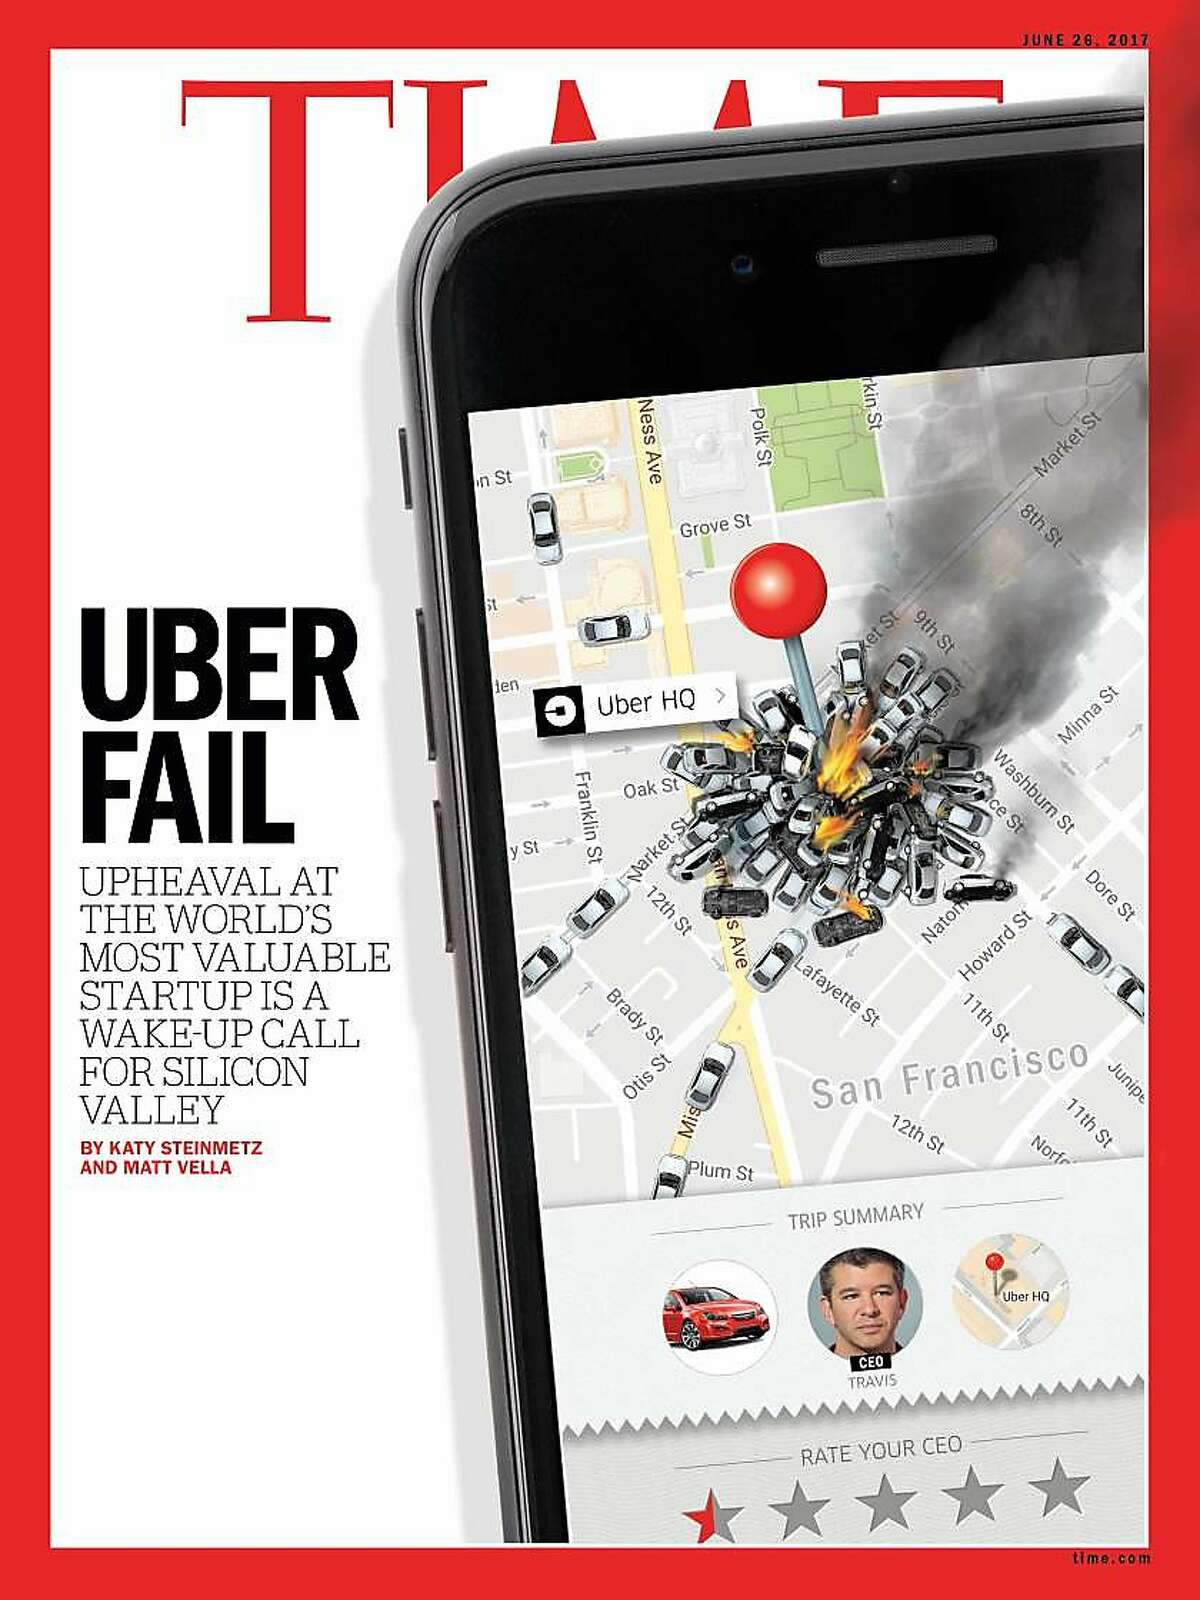 Time magazine features Uber's disastrous past few months on its latest cover.